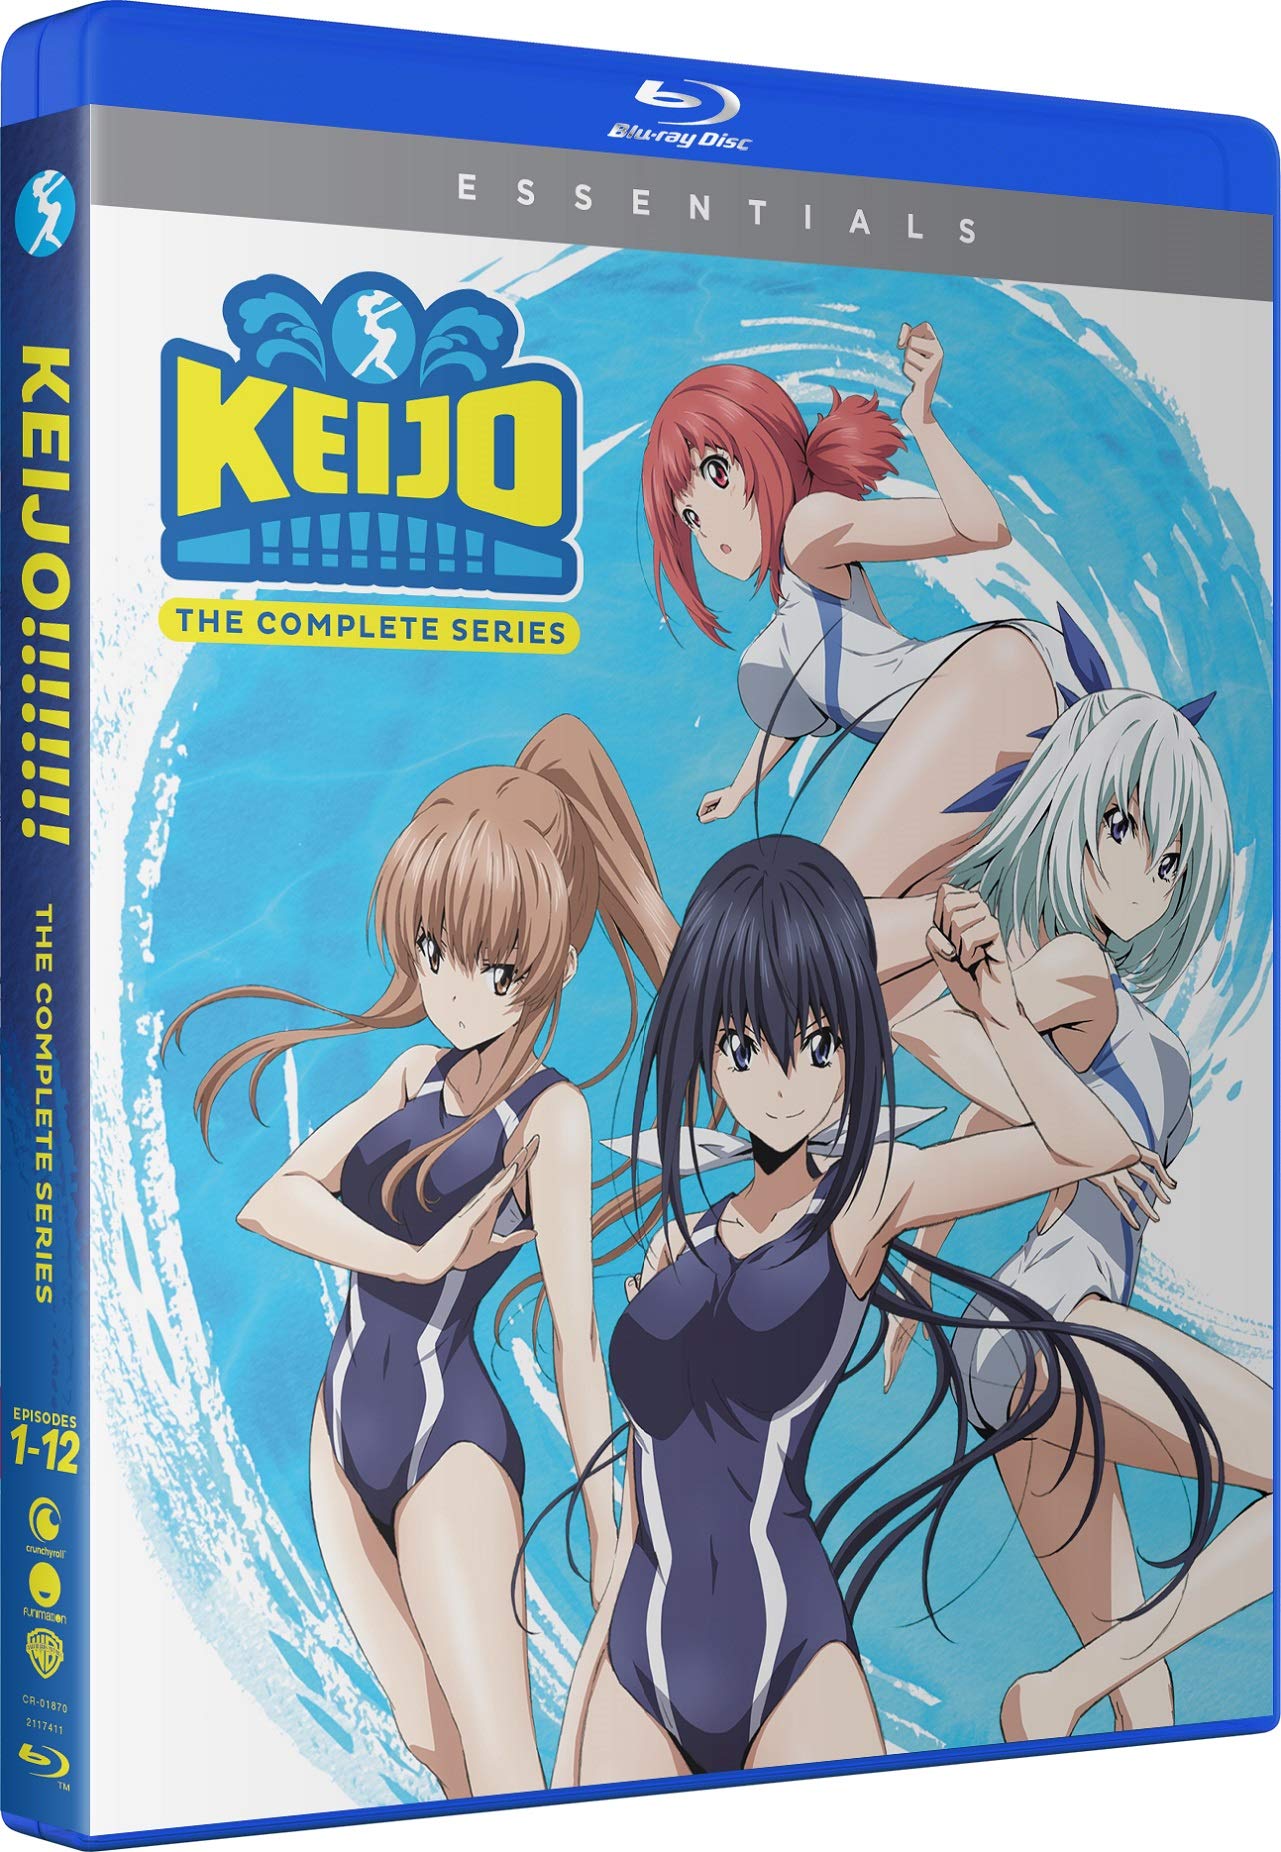 delia green recommends Does Keijo Have Nudity